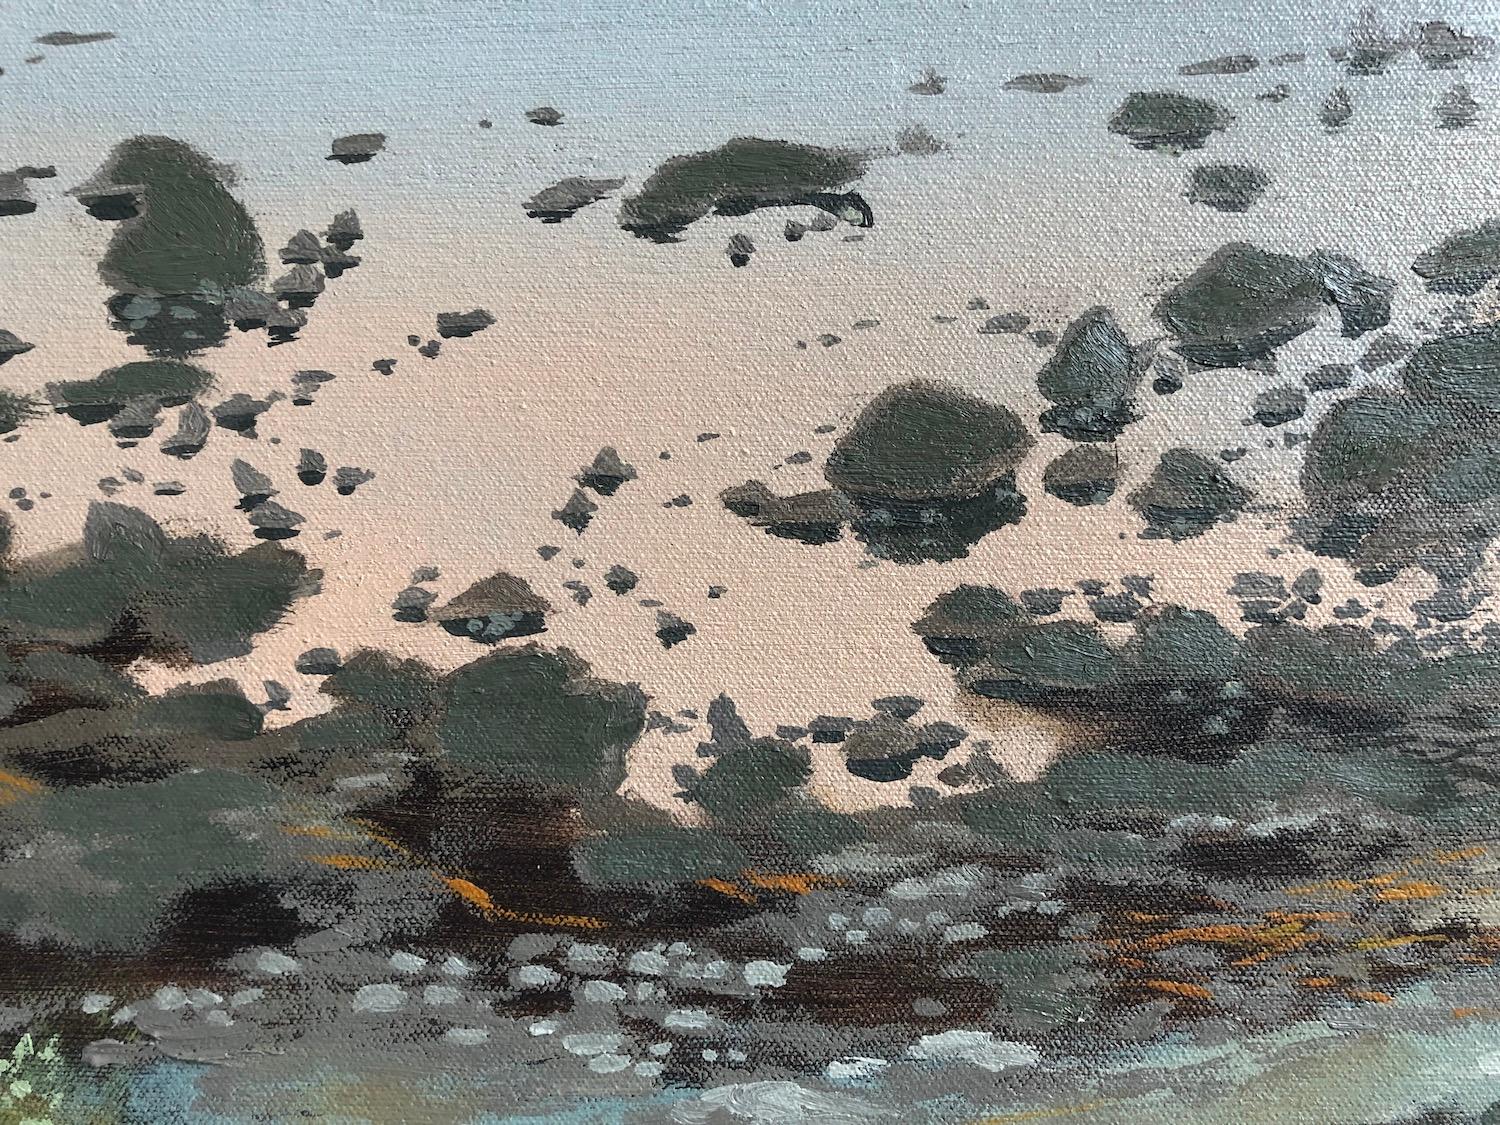 Mirror Calm at Ragged Point, Oil Painting 1